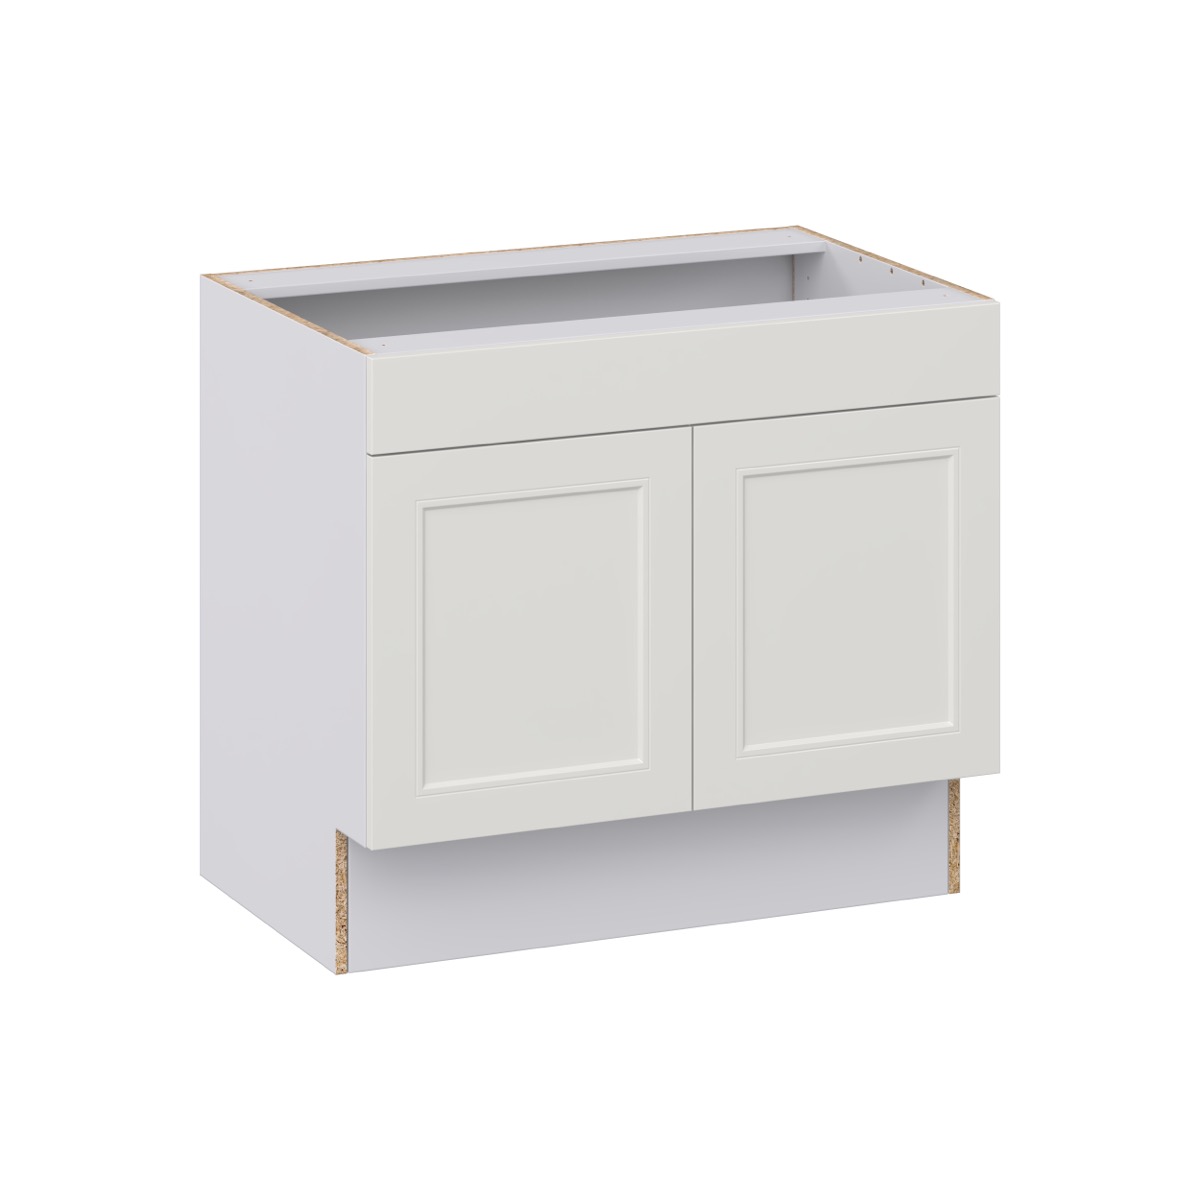 Littleton Base Cabinet 36 .in W x 32.5 .in H x 23 .in D - J Collection